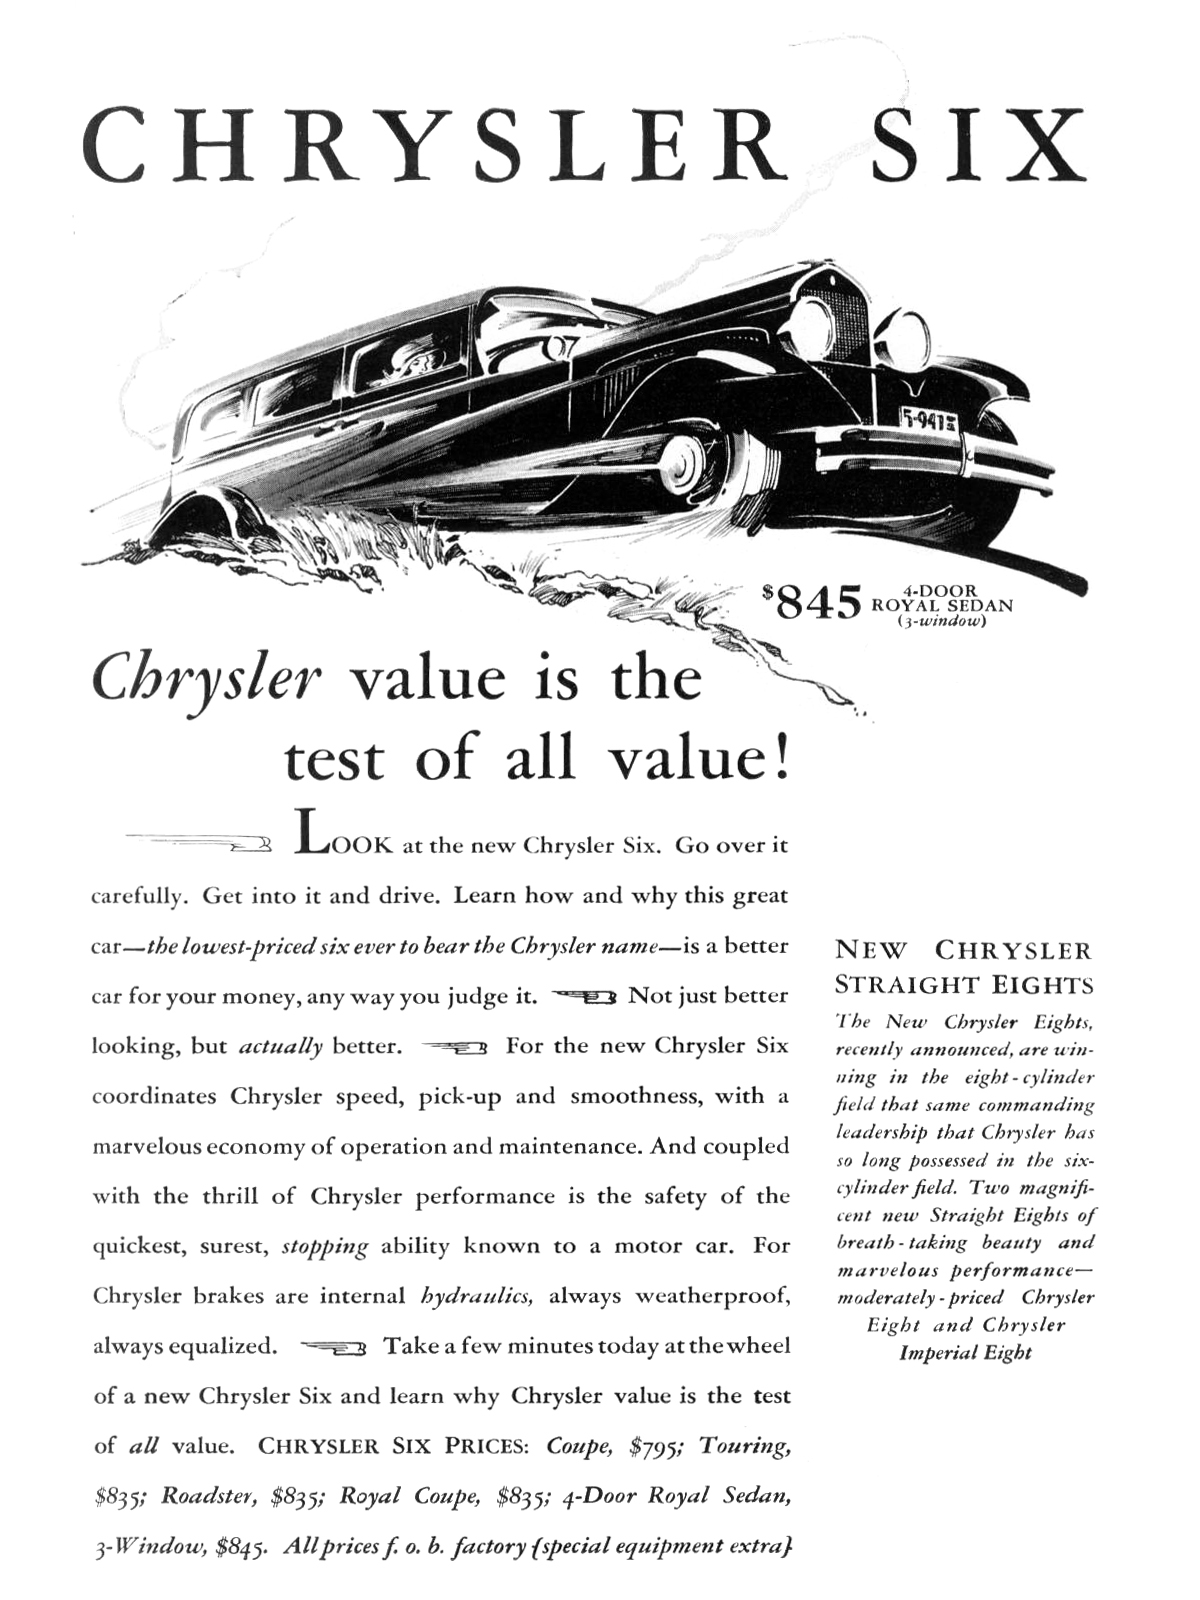 Chrysler Six 4-Door Royal Sedan Ad (August, 1930) - Illustrated by Fred Cole